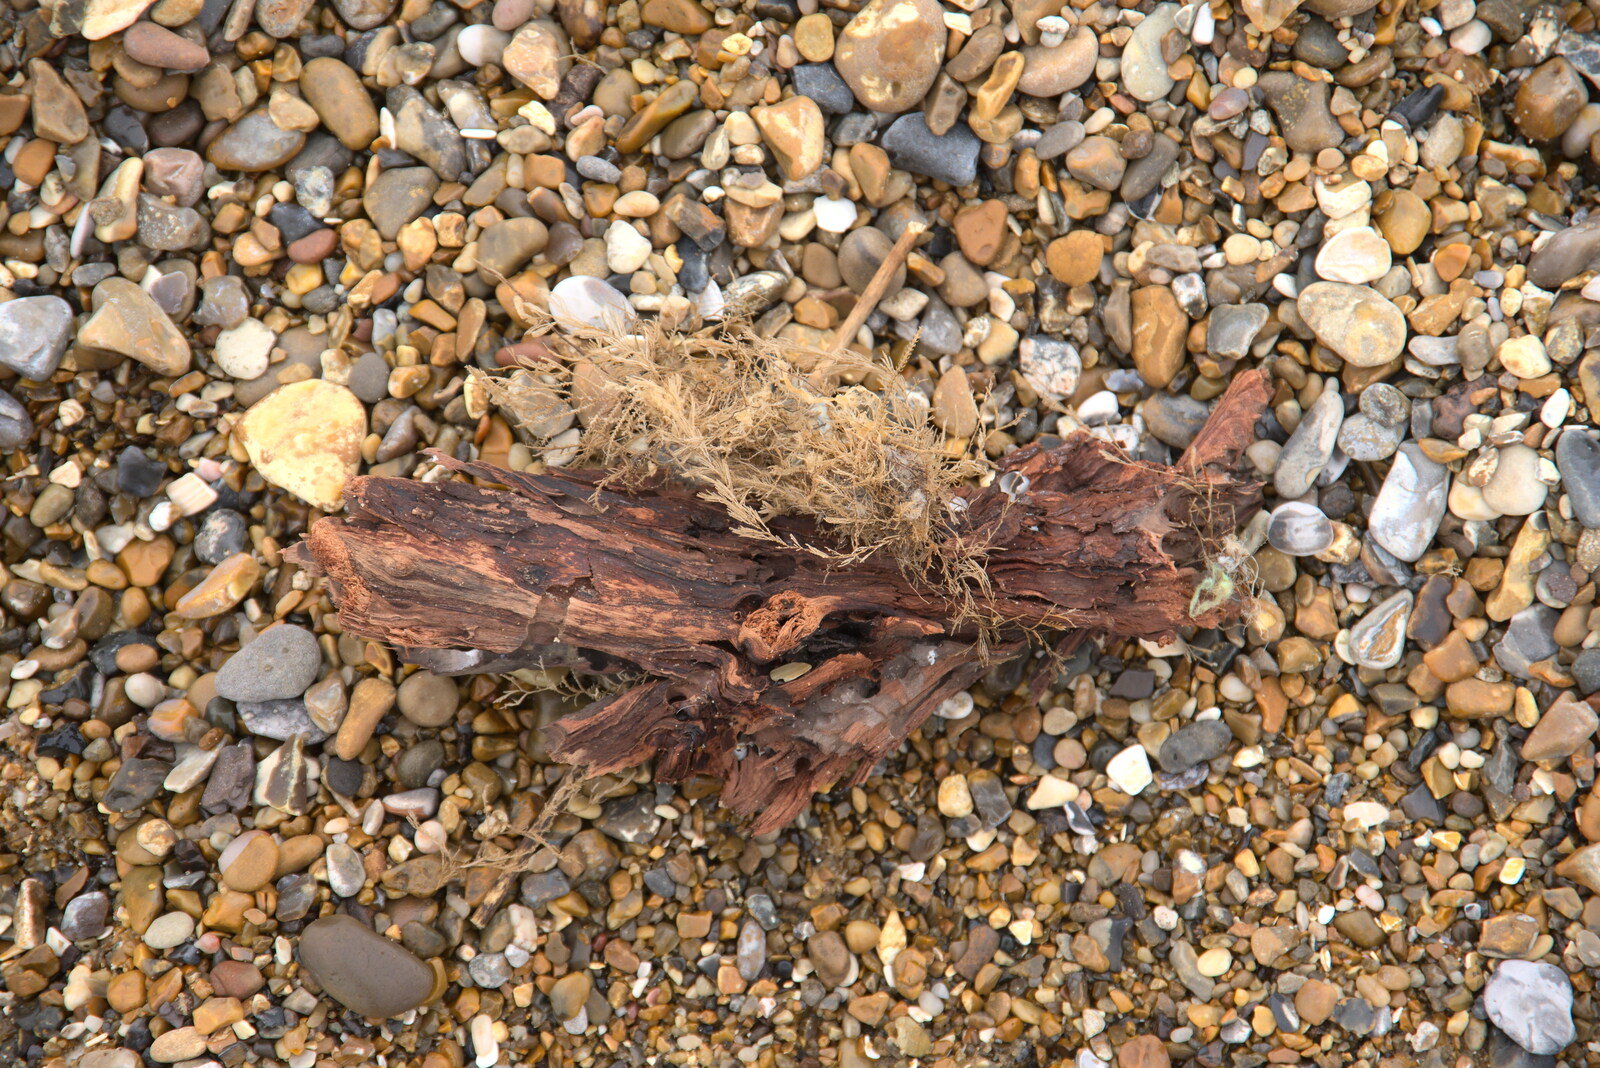 Wood and dried plant matter from A Trip to Dunwich Beach, Dunwich, Suffolk - 2nd April 2021